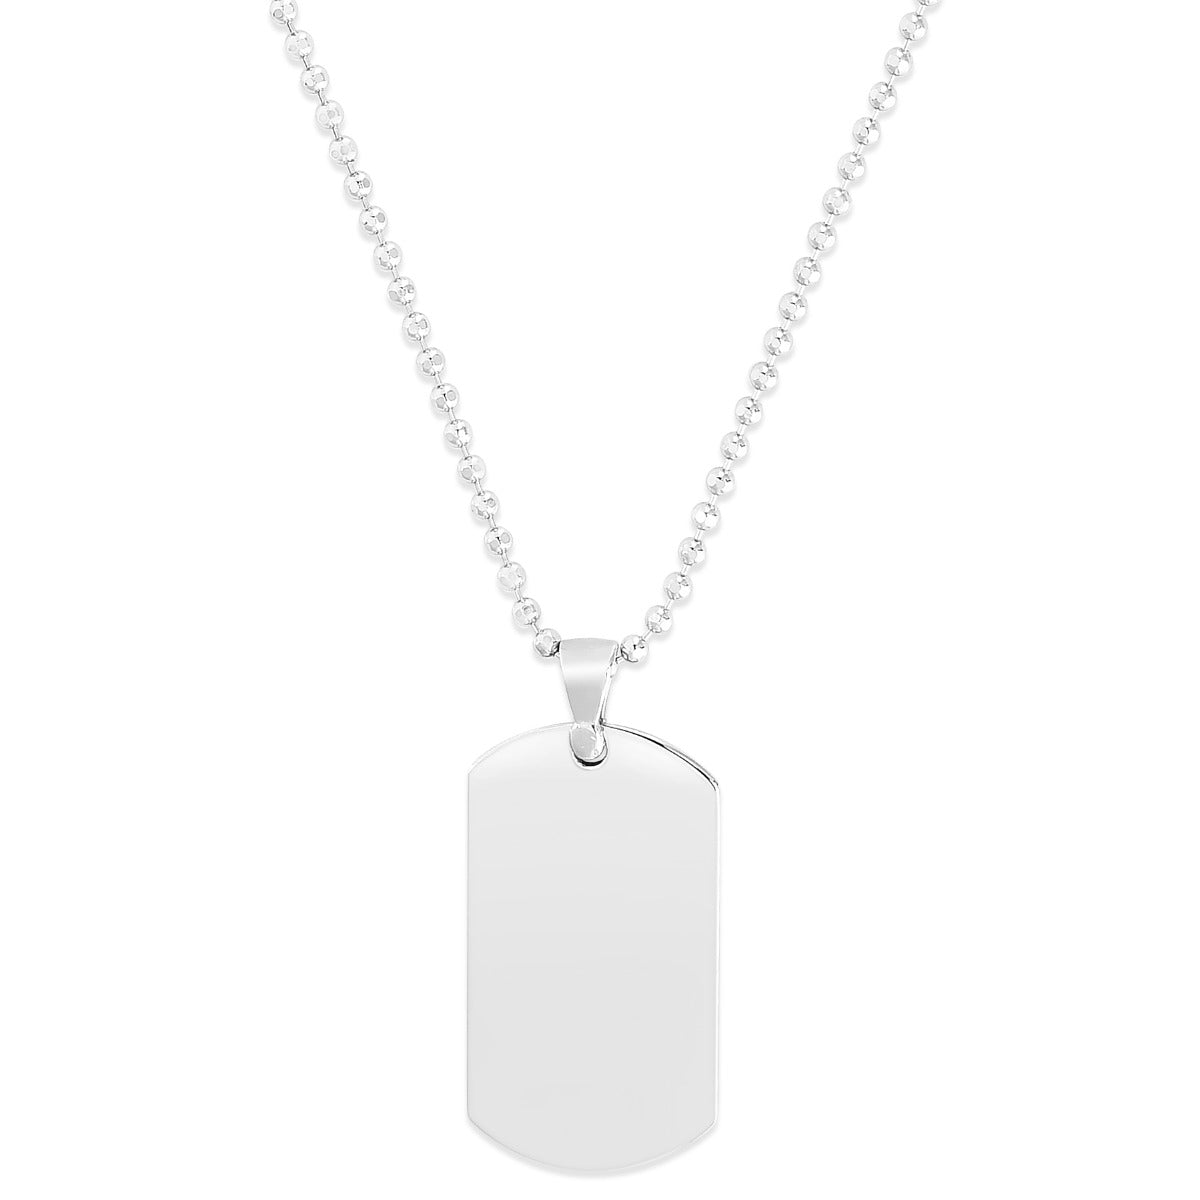 Sterling Silver Polished Rectangular Tag Necklace with Lobster Clasp